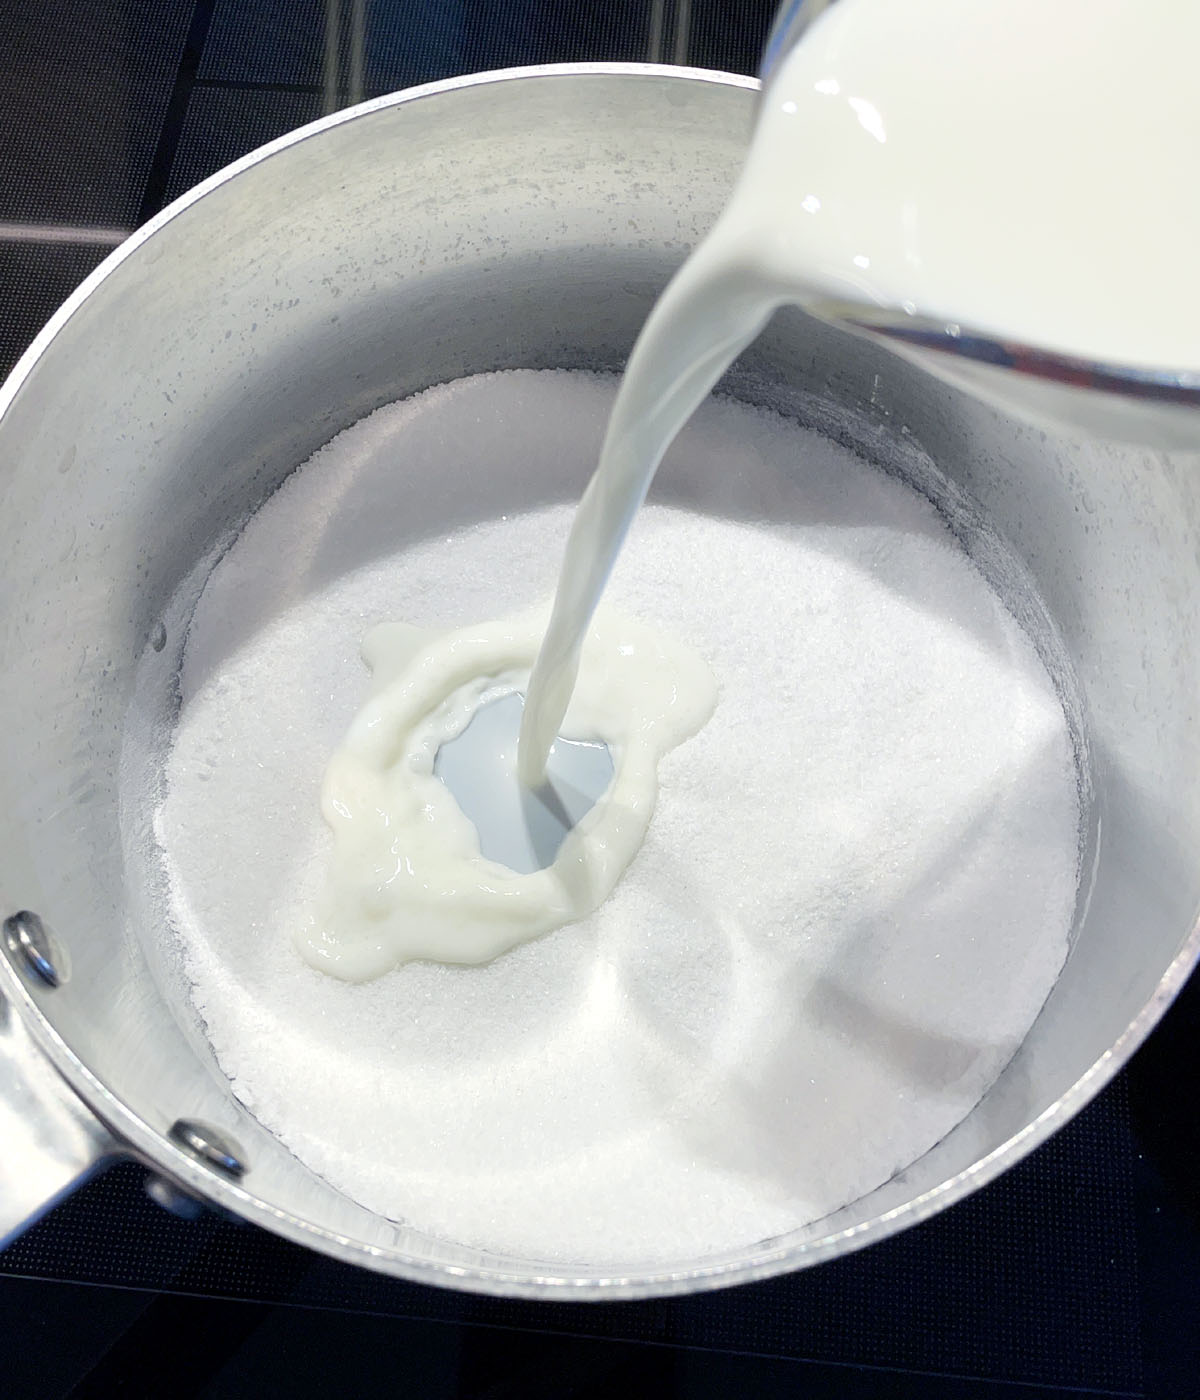 Milk being poured into a pot containing white sugar and powder.